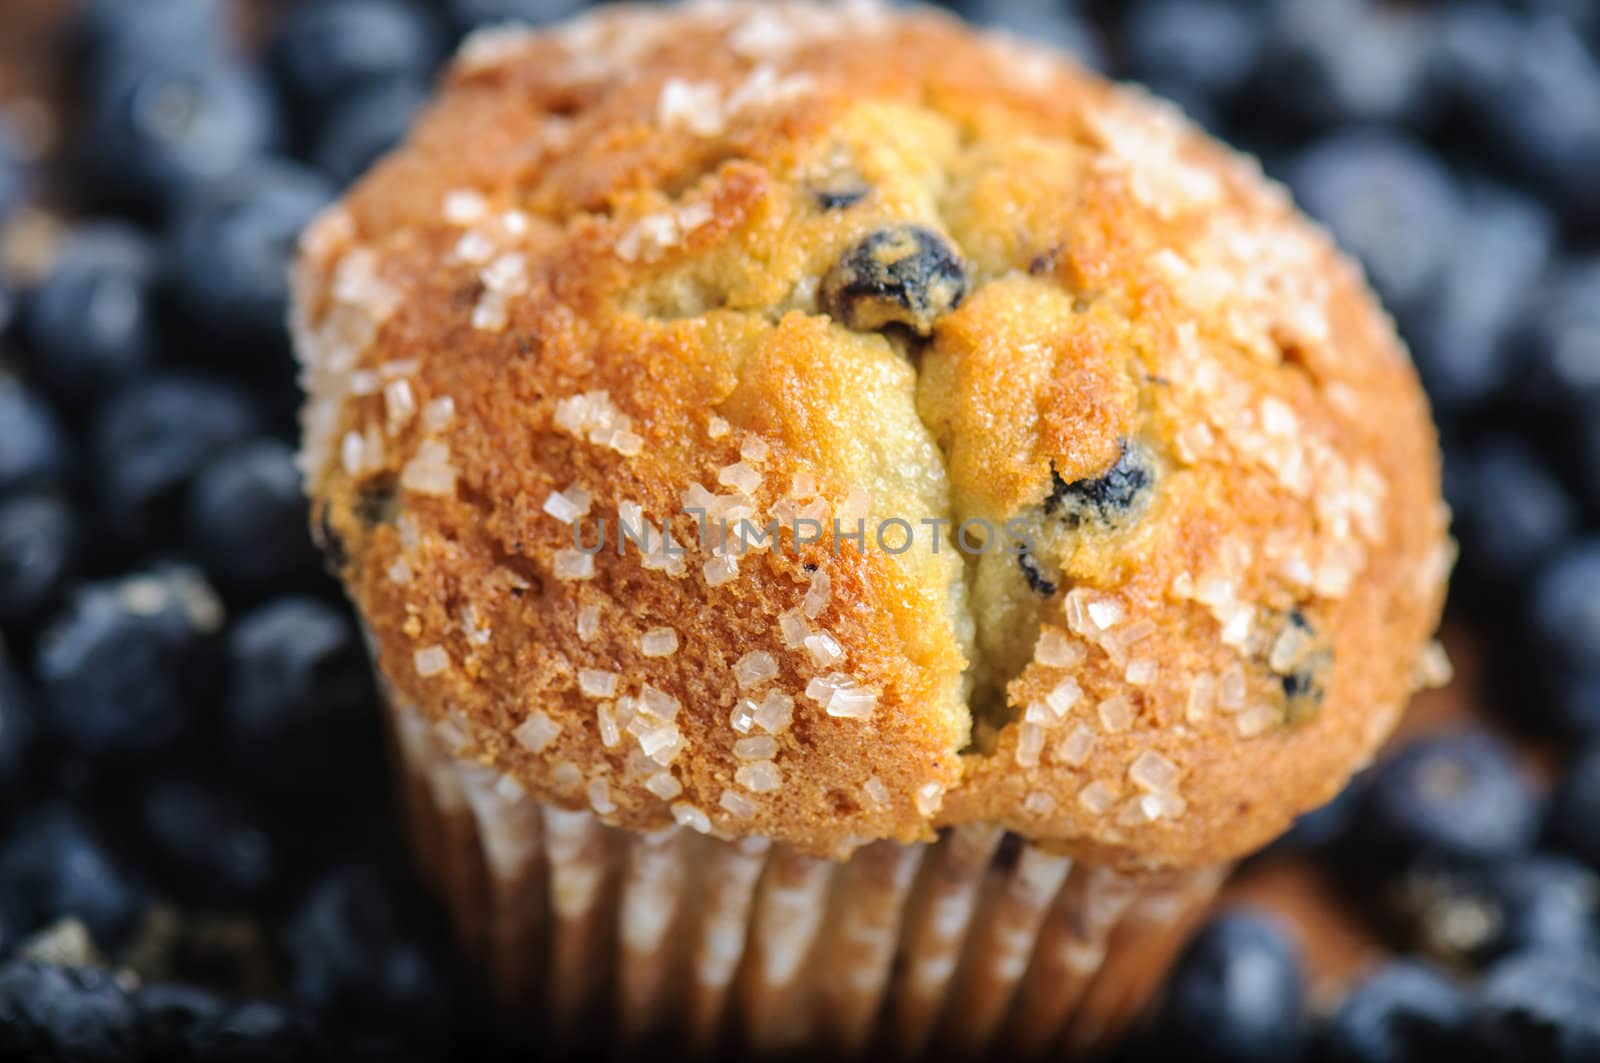 Blueberry Muffin with Blueberries in Background